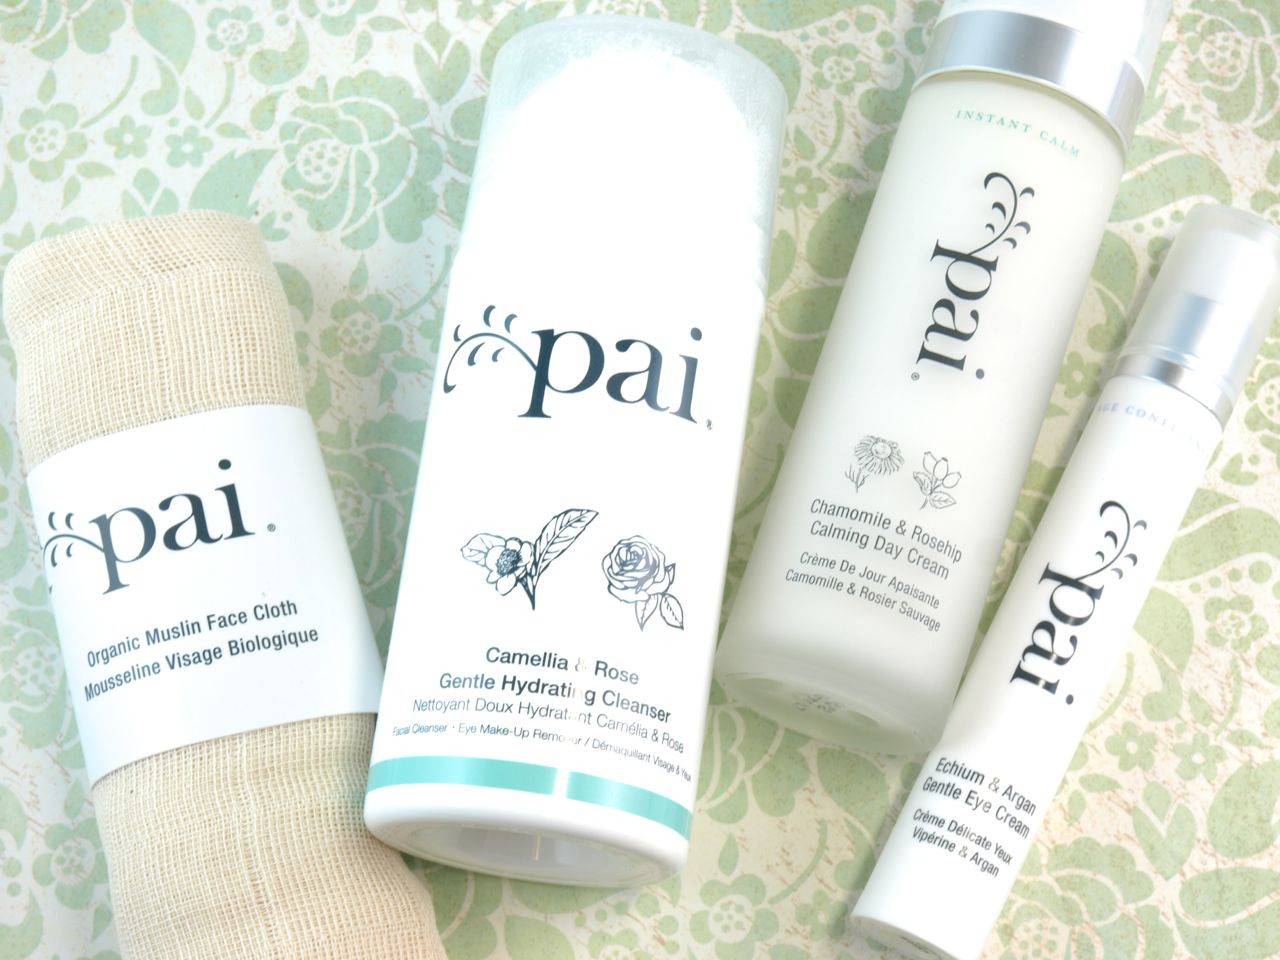 grammatik Neuropati Knop Pai Skincare for Sensitive Skin: Review | The Happy Sloths: Beauty, Makeup,  and Skincare Blog with Reviews and Swatches